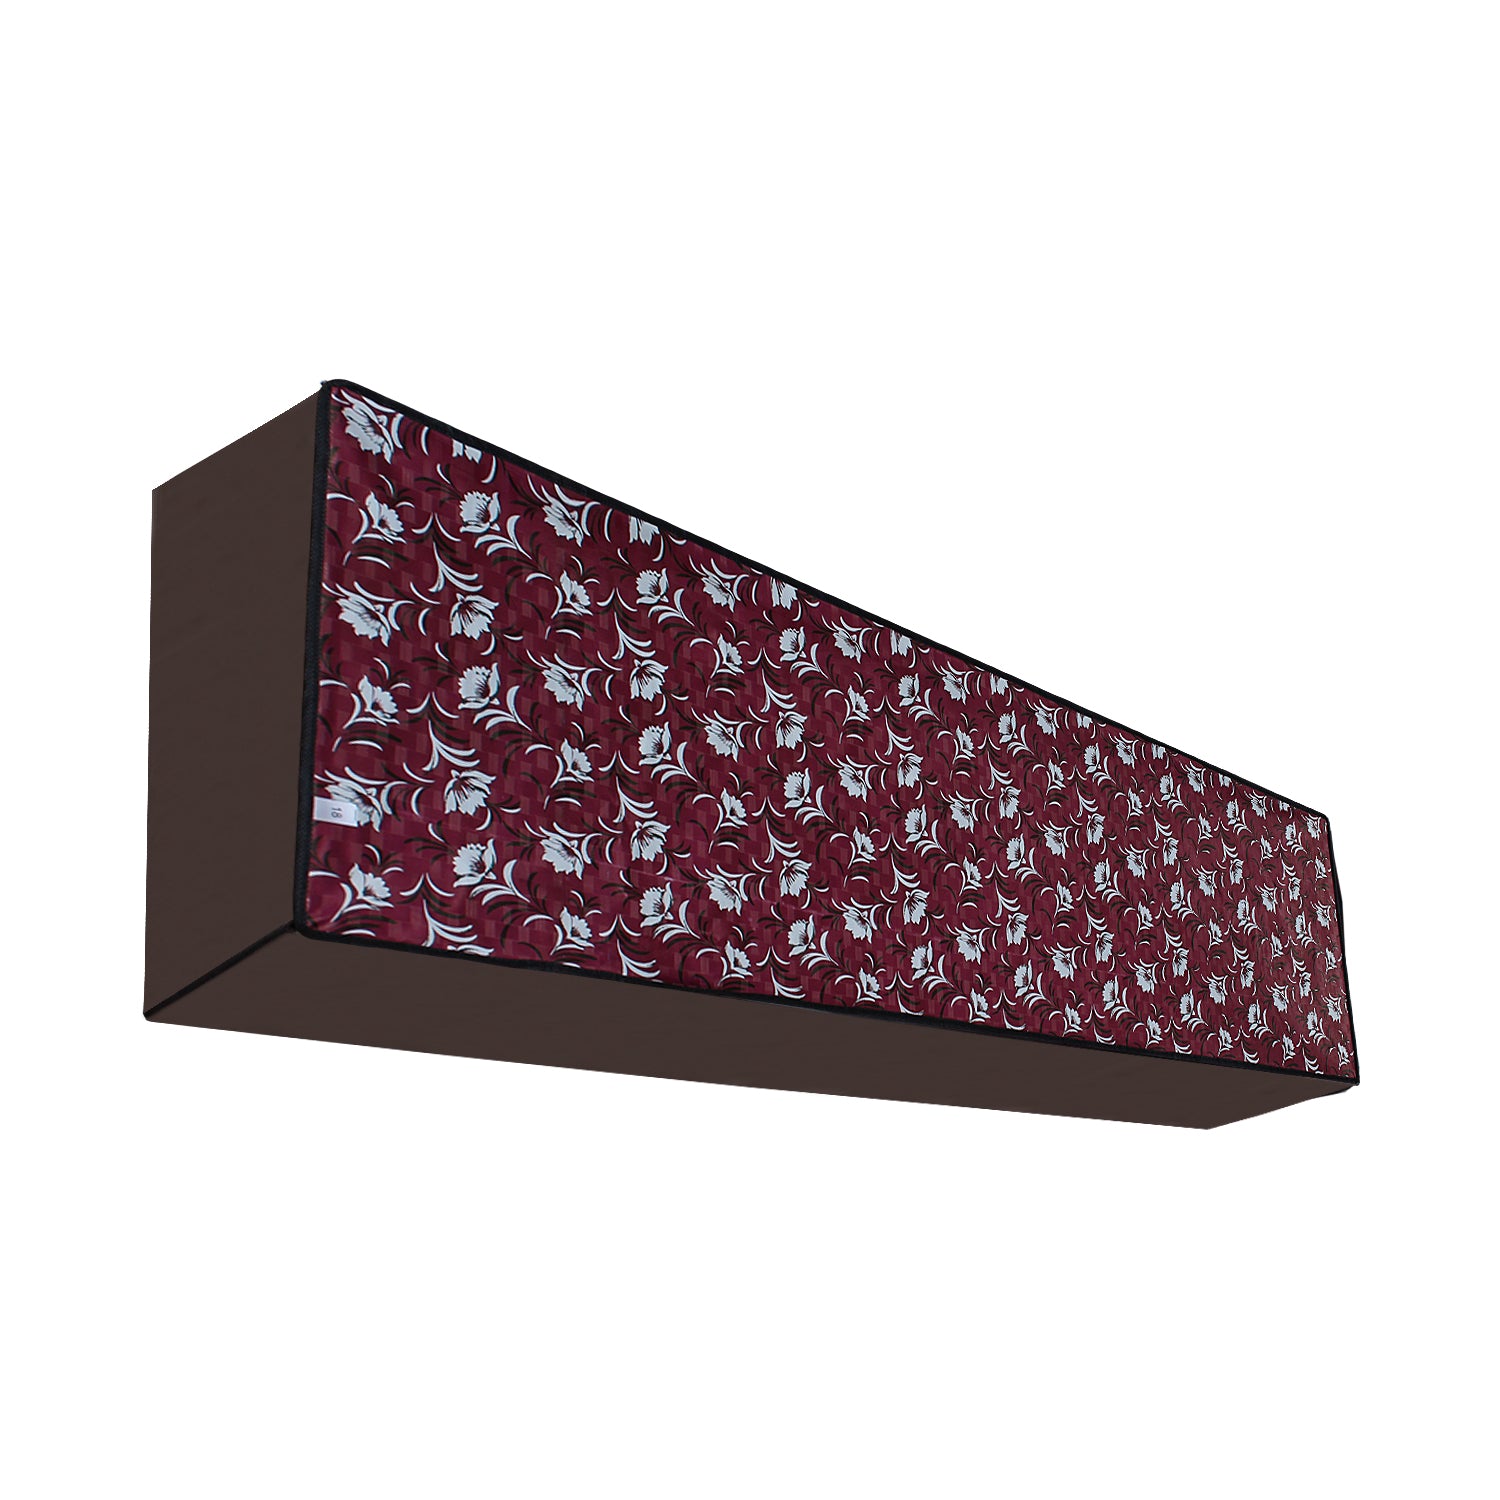 Waterproof and Dustproof Split Indoor AC Cover, SA48 - Dream Care Furnishings Private Limited